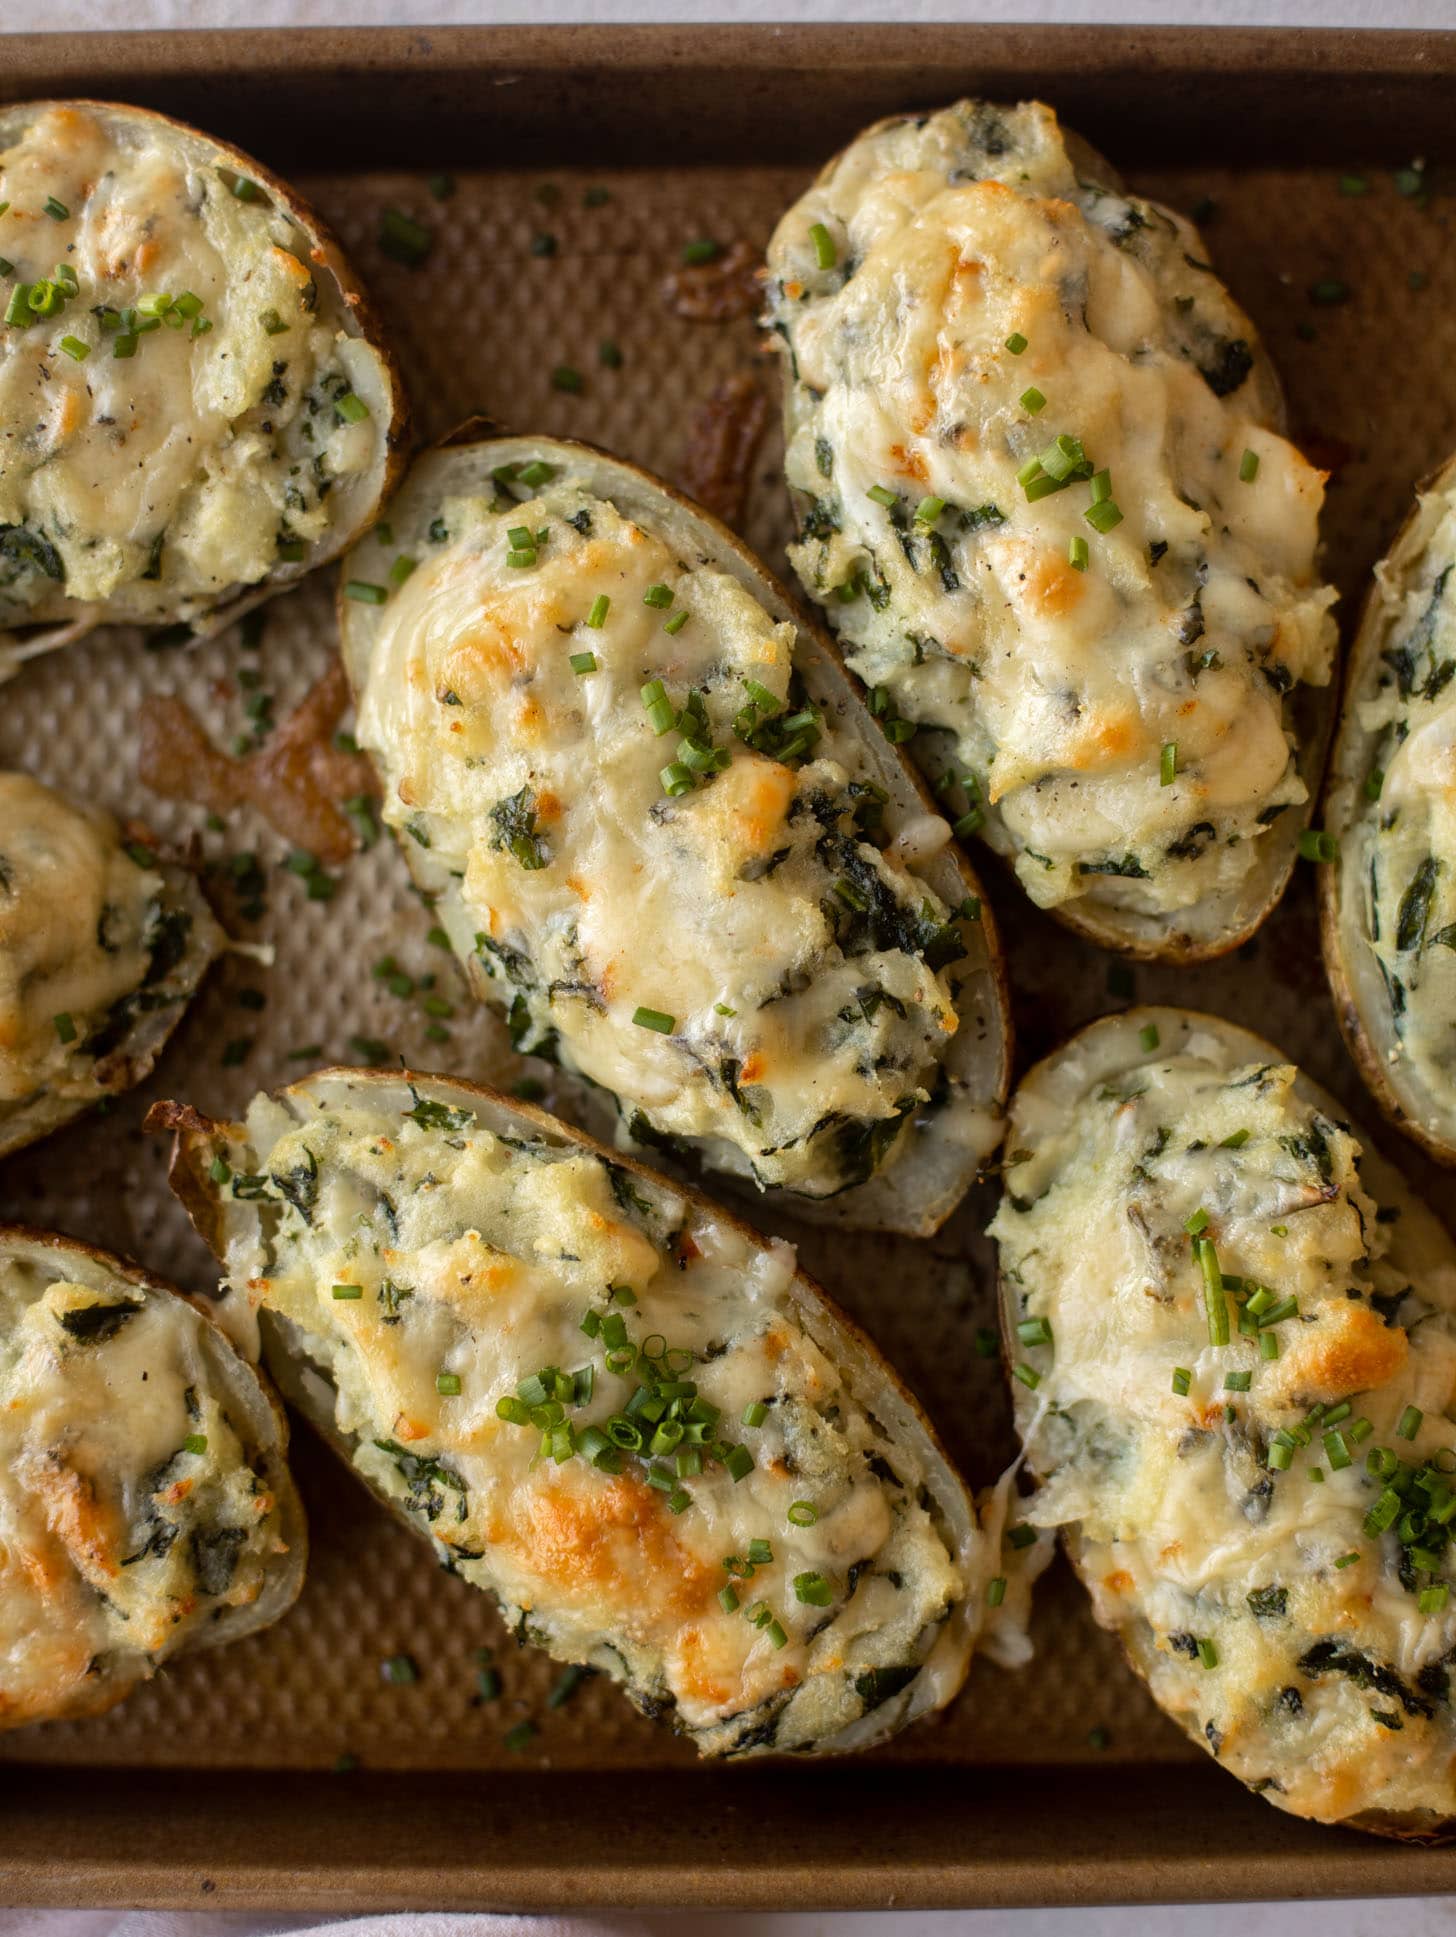 Kale and Smoked Cheddar Twice Baked Potatoes.